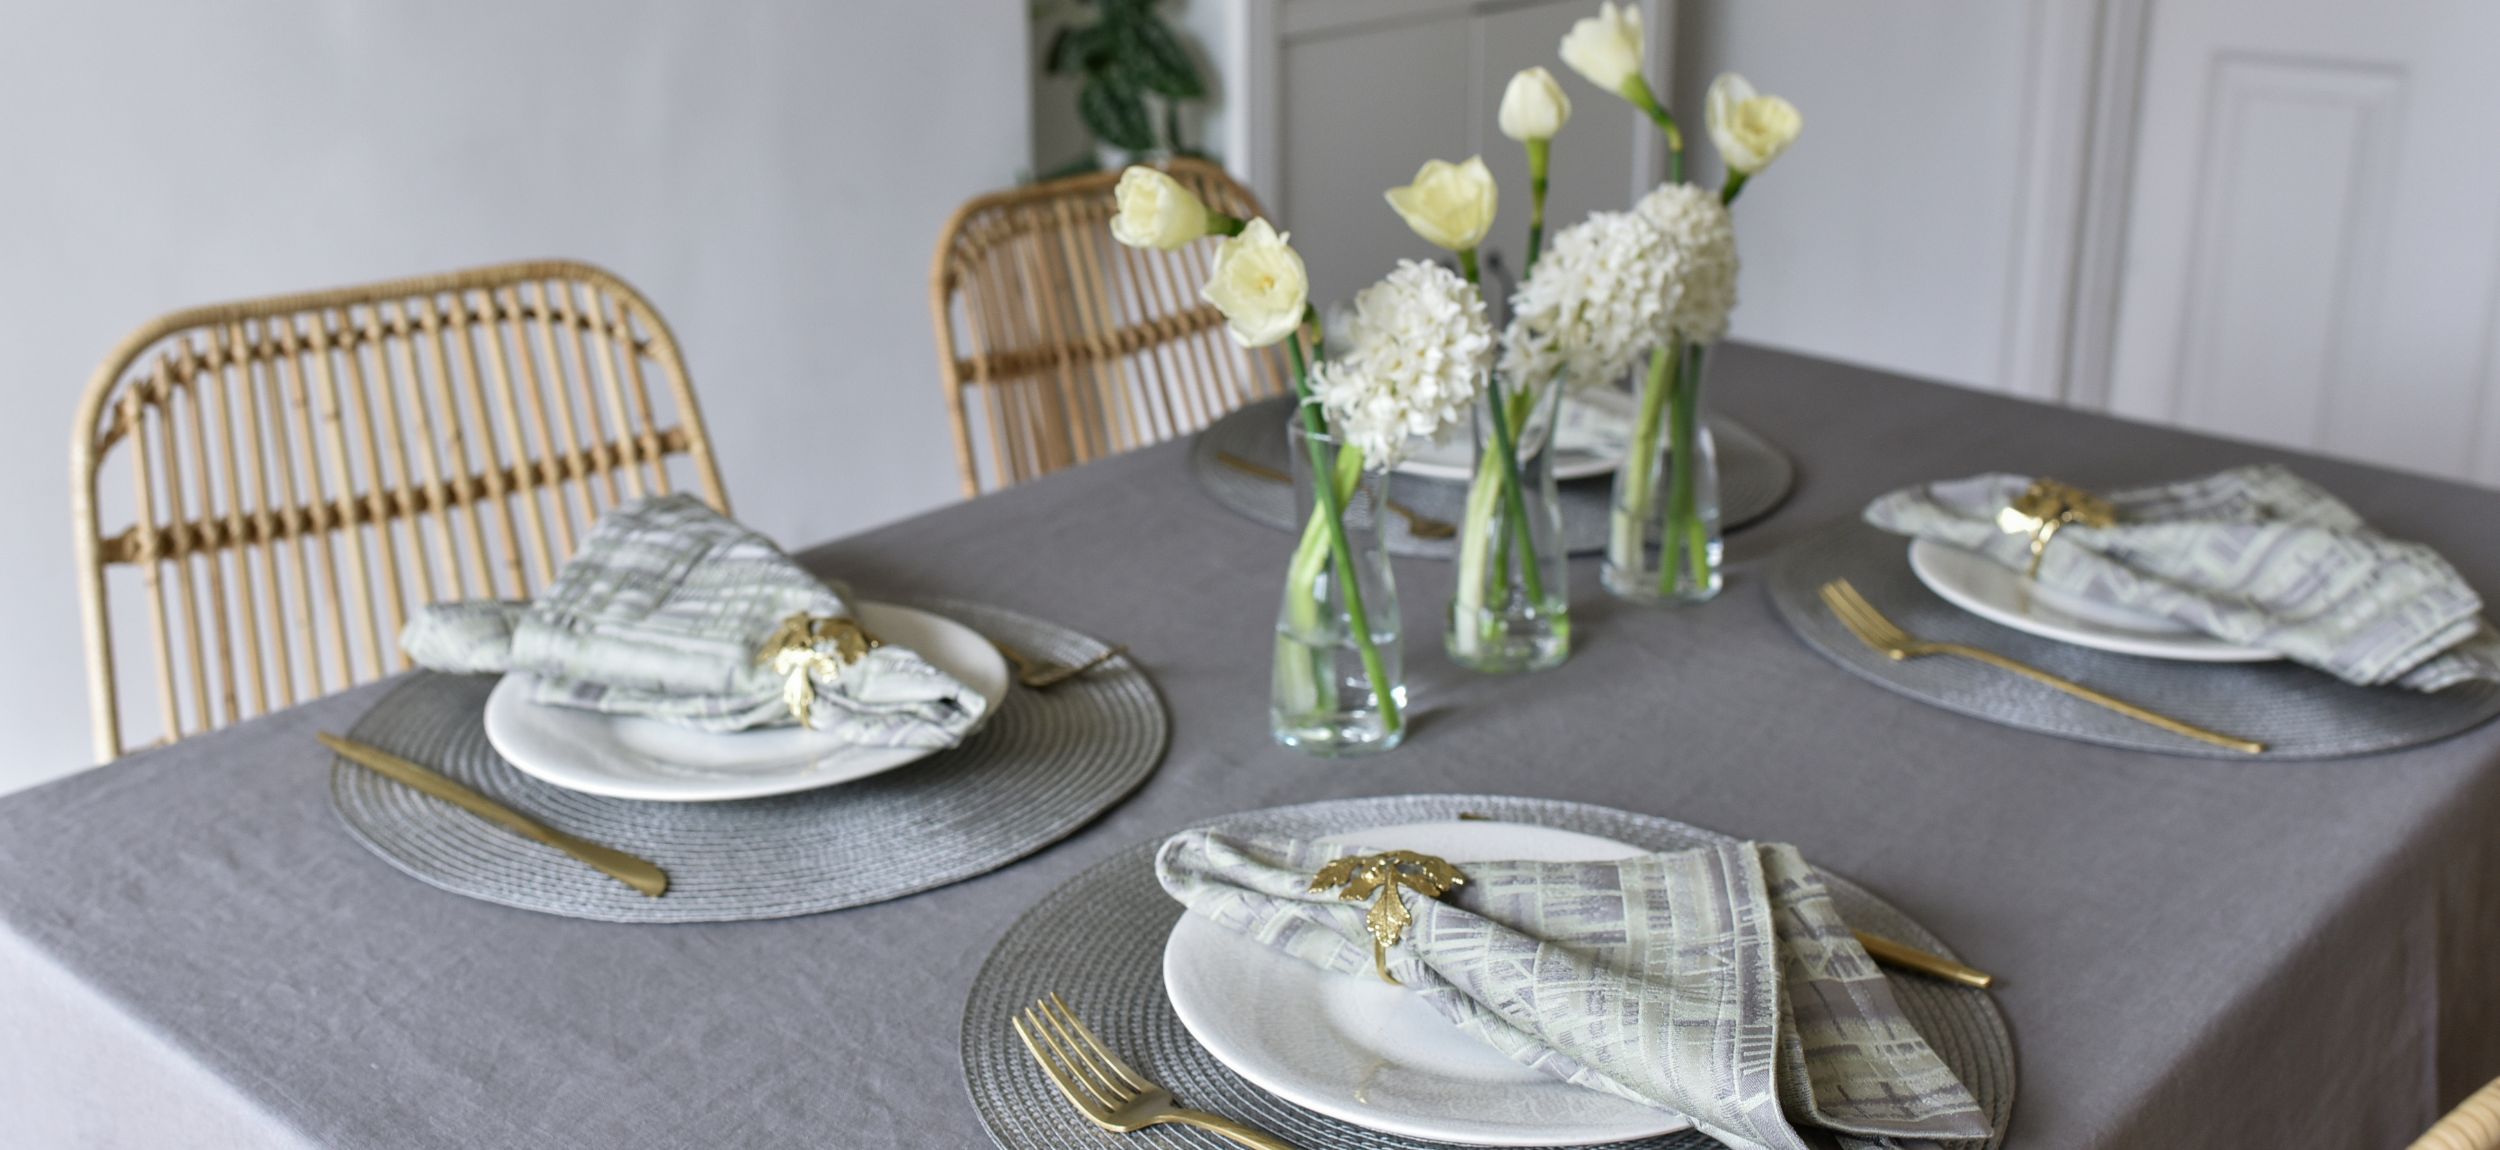 Put the spring back in your table with our Cityscapes fabric collection